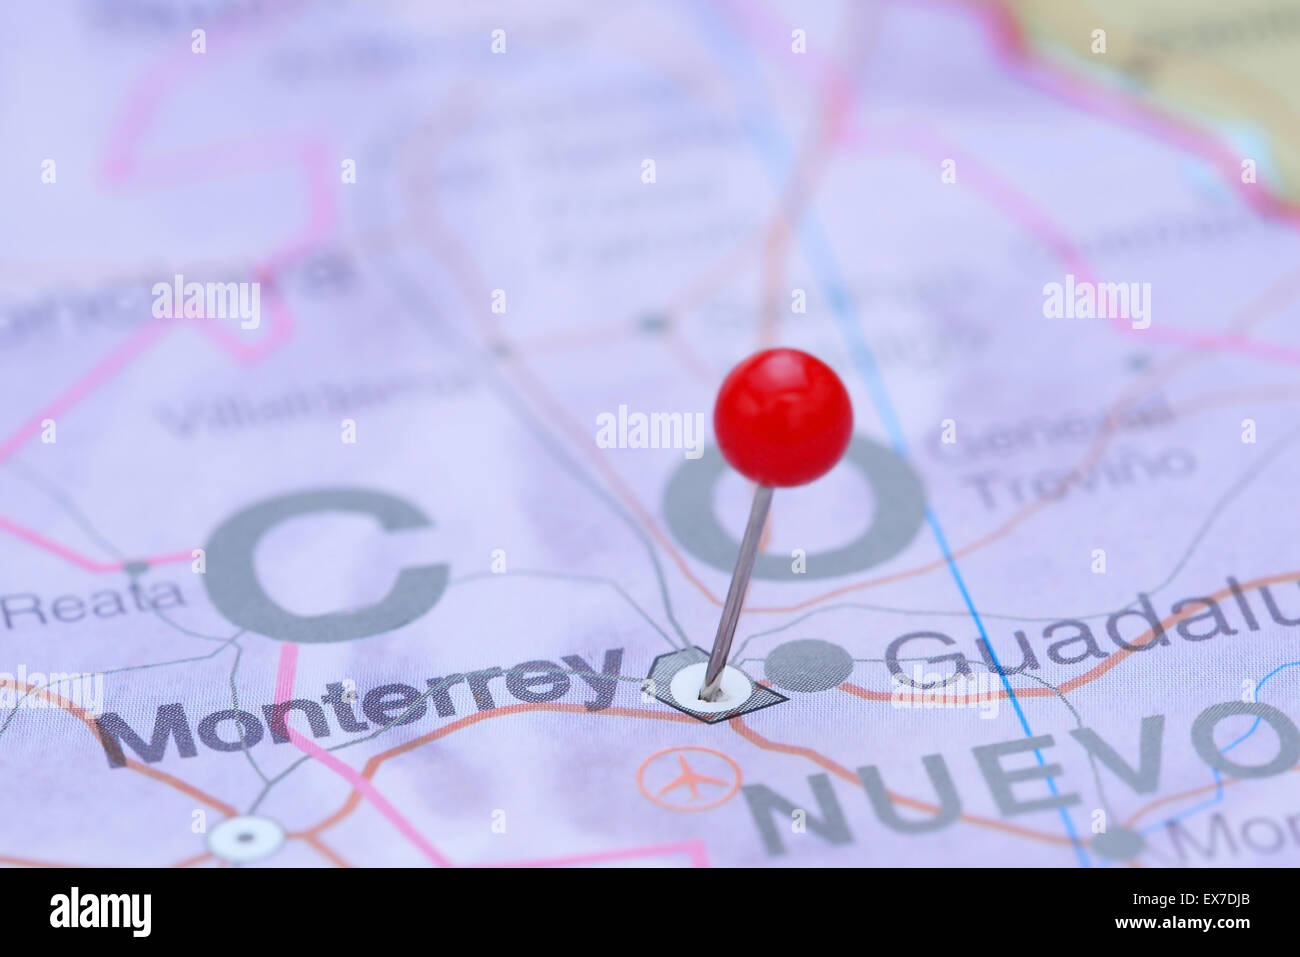 Monterrey pinned on a map of America Stock Photo